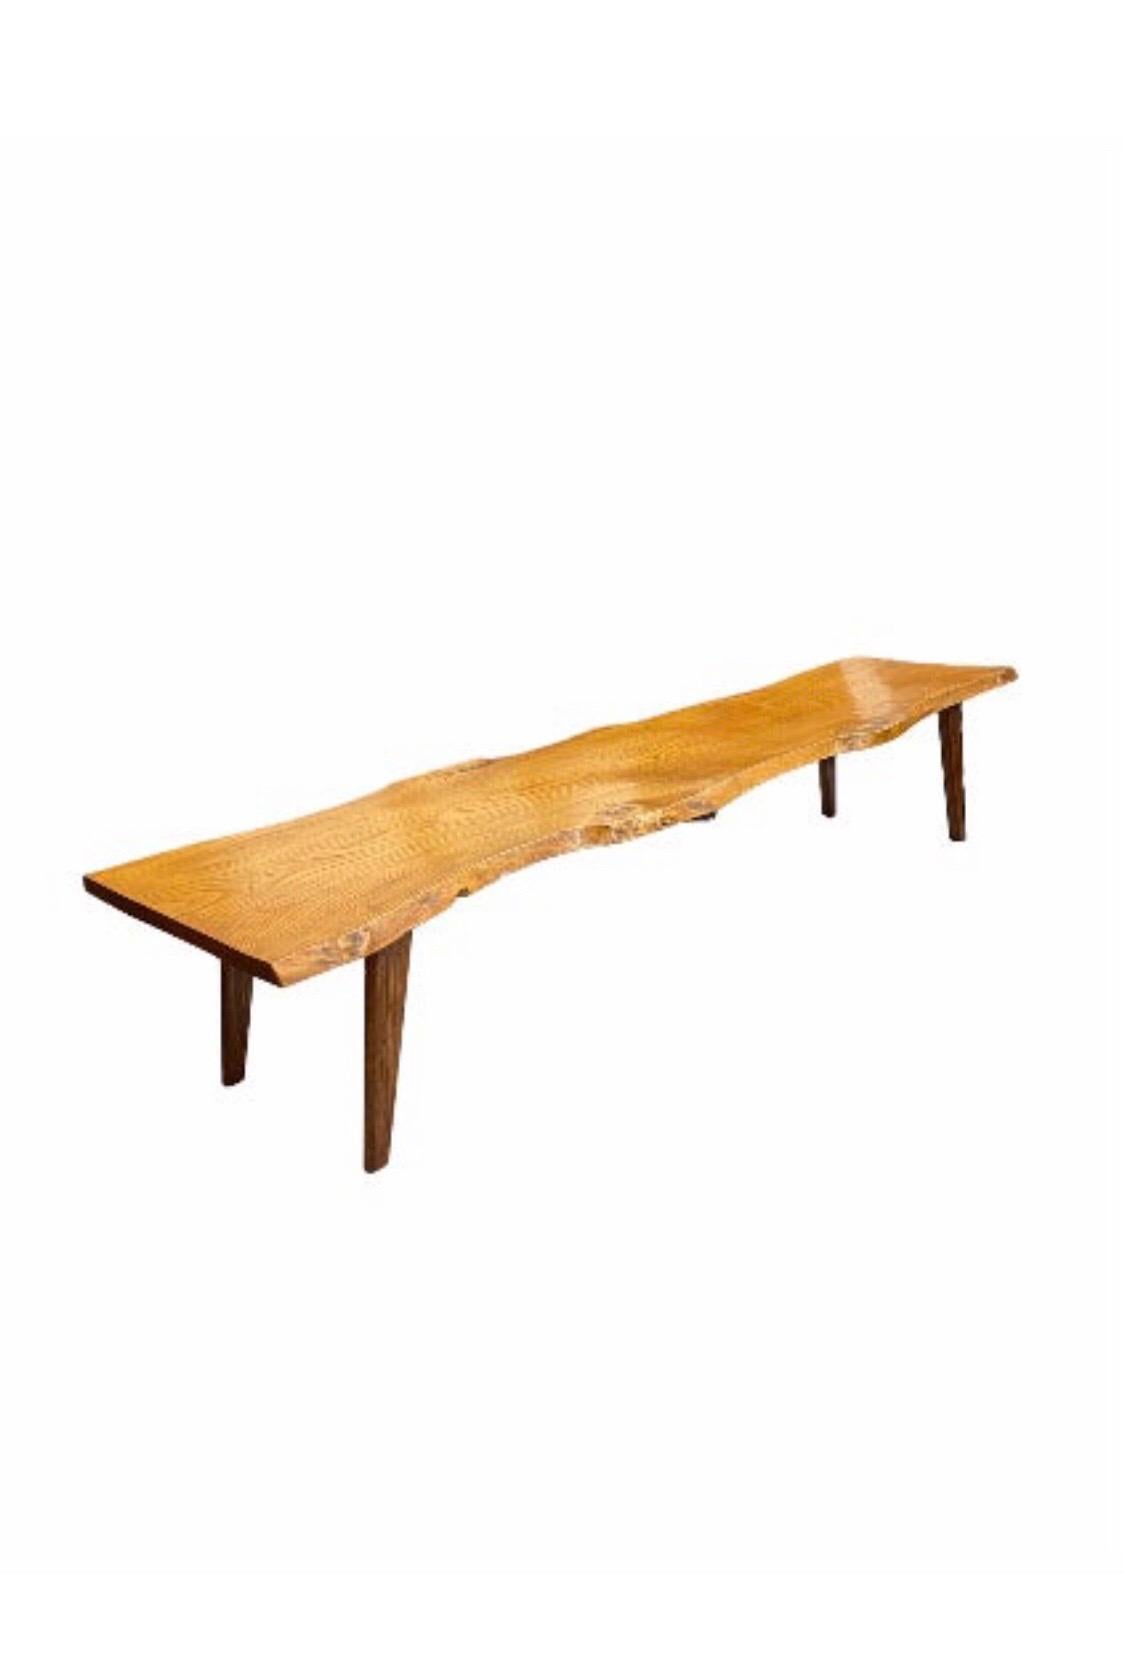 Mid-20th Century 1960s Solid Wood Slab Plant Stand Table Bench Accent For Sale